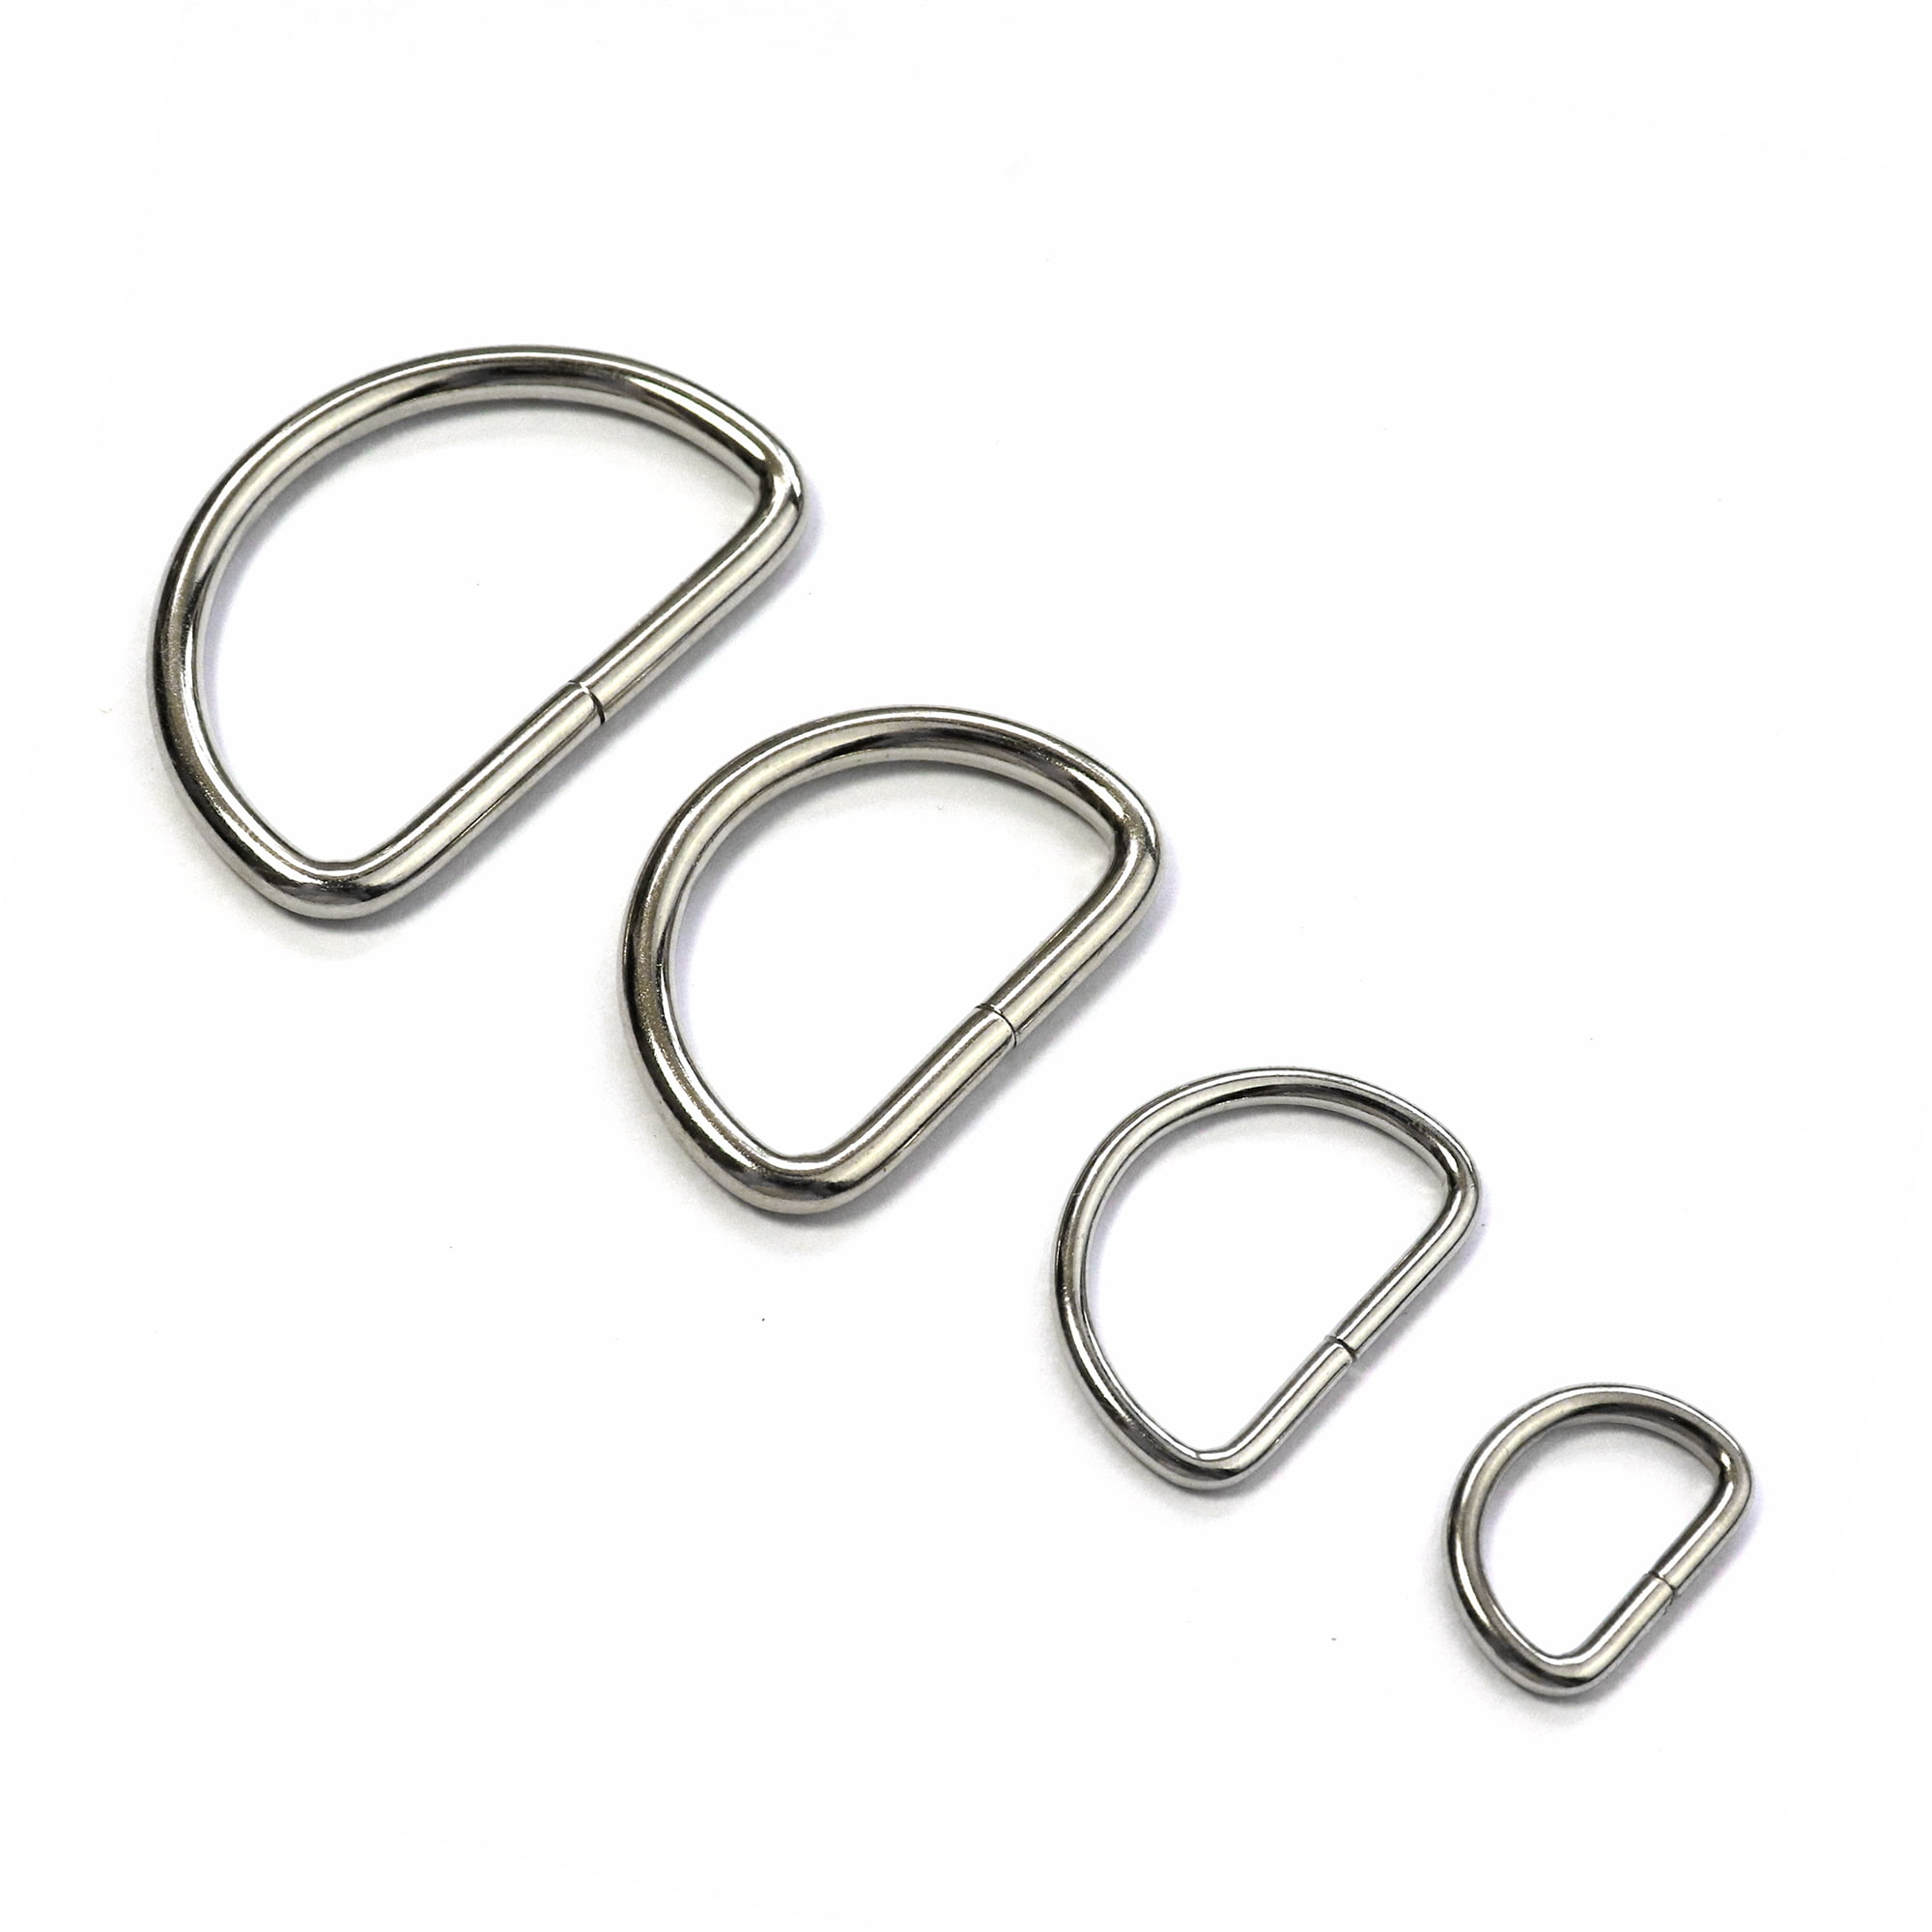 CrocSee Metal D Ring 1 inch Non Welded Nickel Plated Pack Of 100 Large